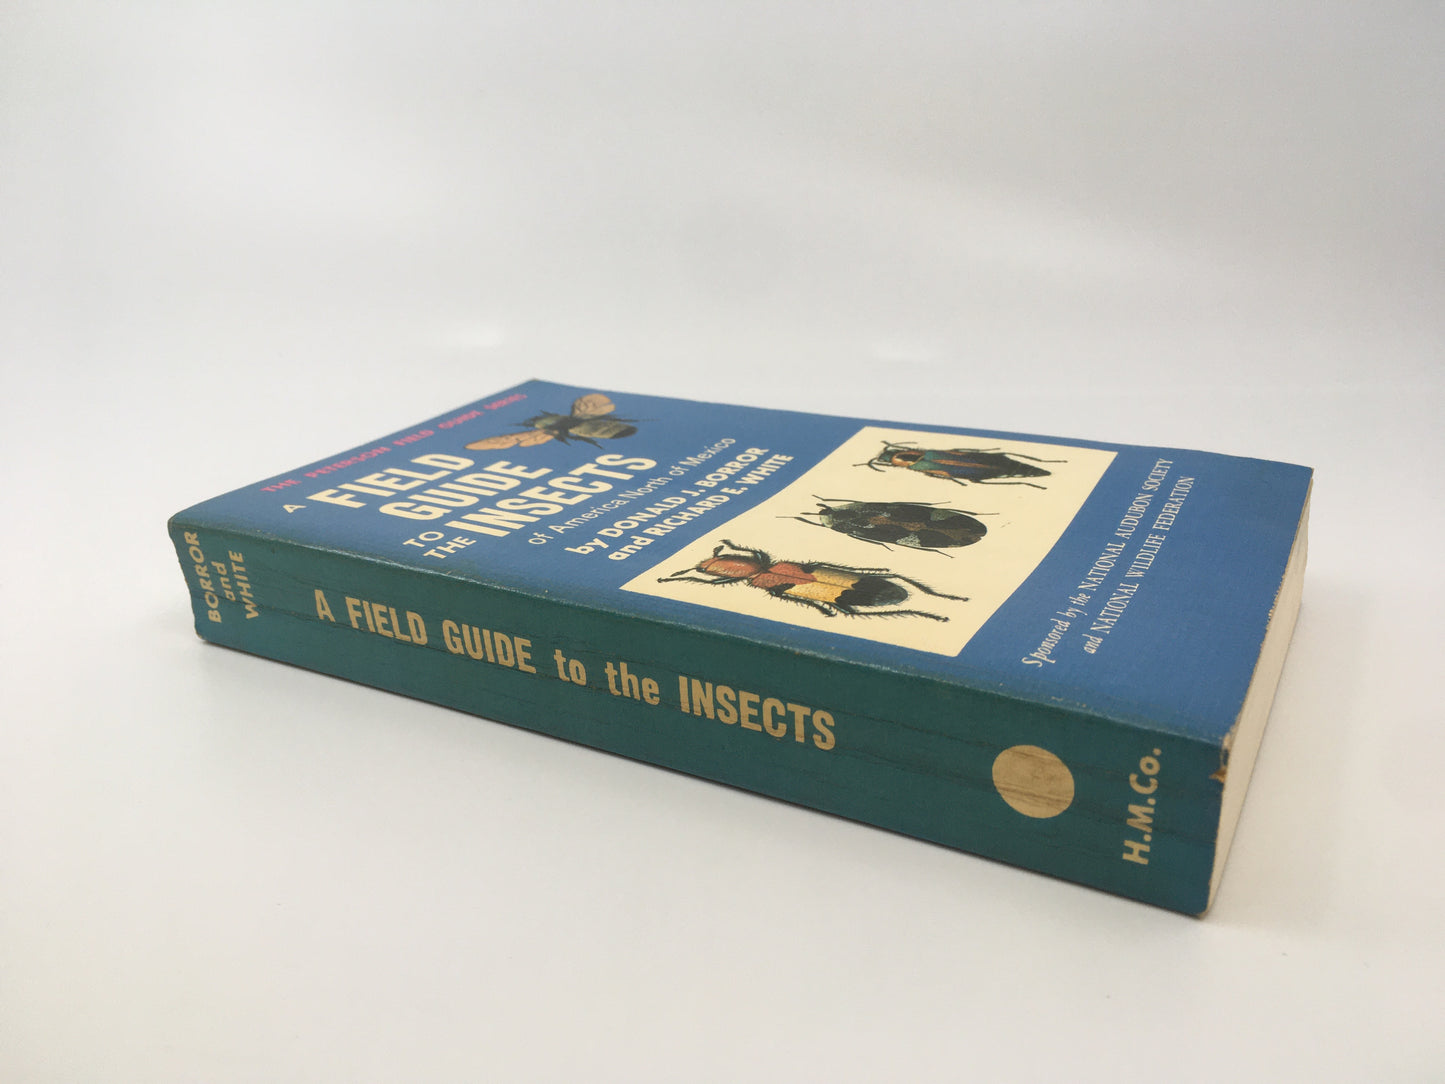 A Field Guide to the Insects of America North of Mexico